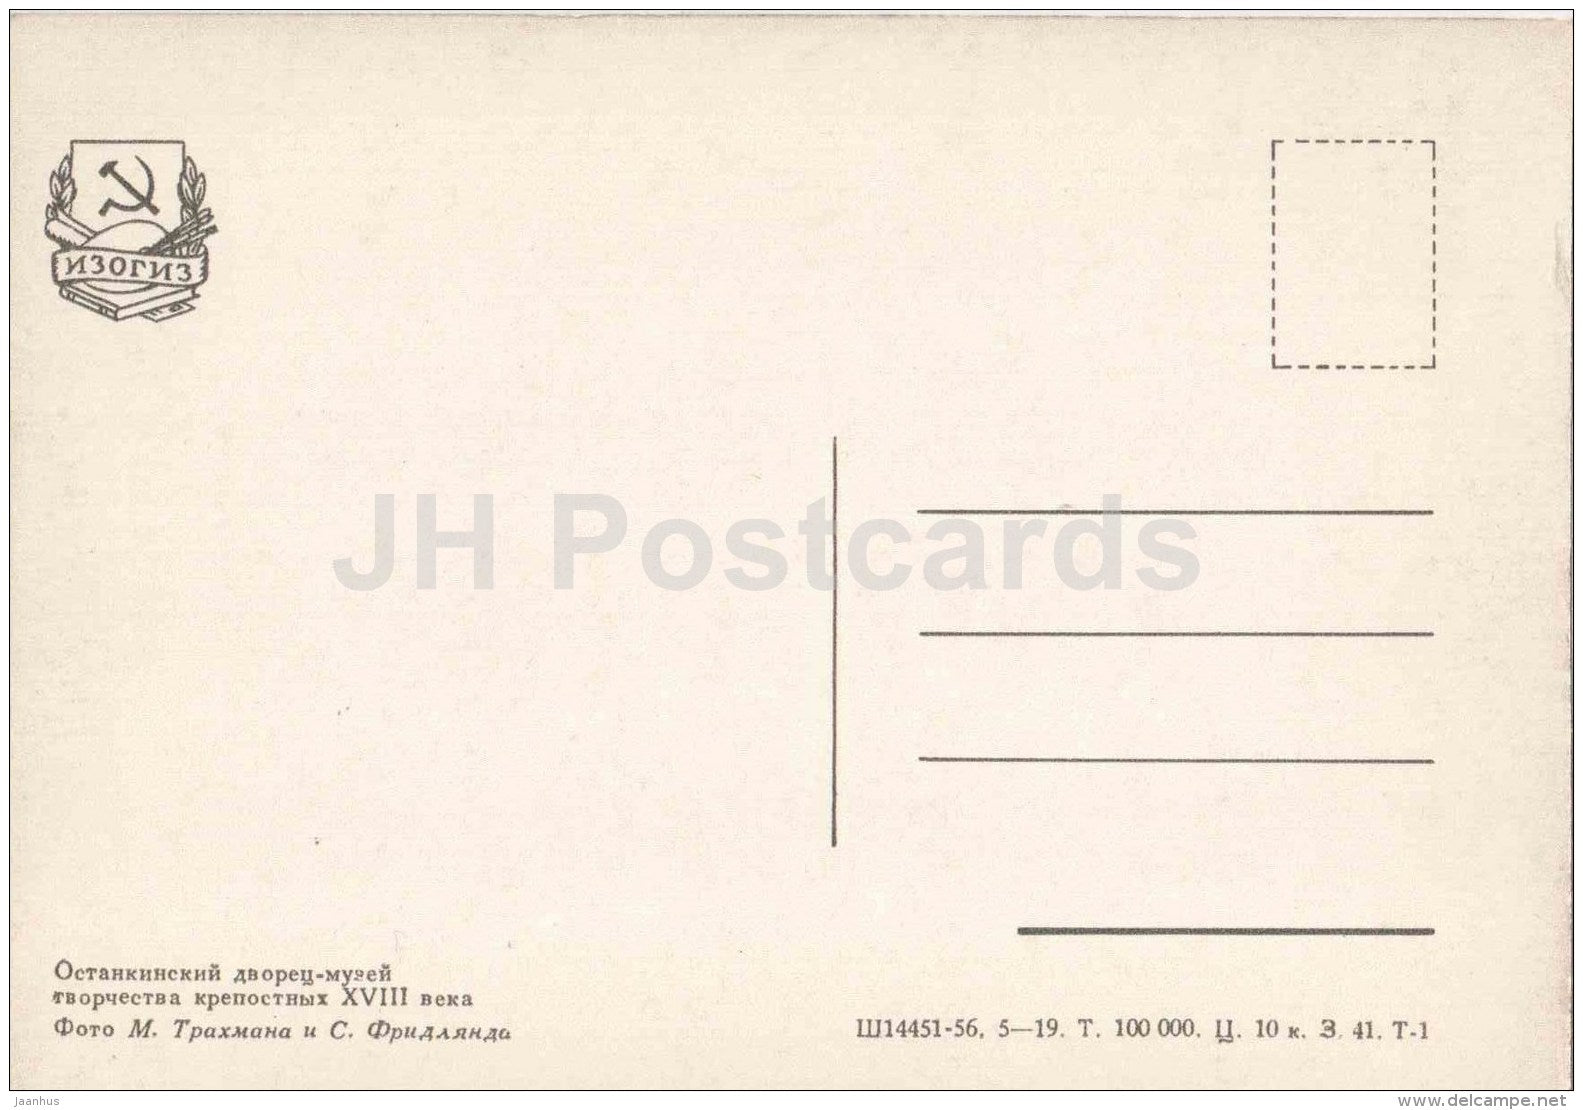 Palace Museum Ostankino - Moscow - 1957 - Russia USSR - unused - JH Postcards